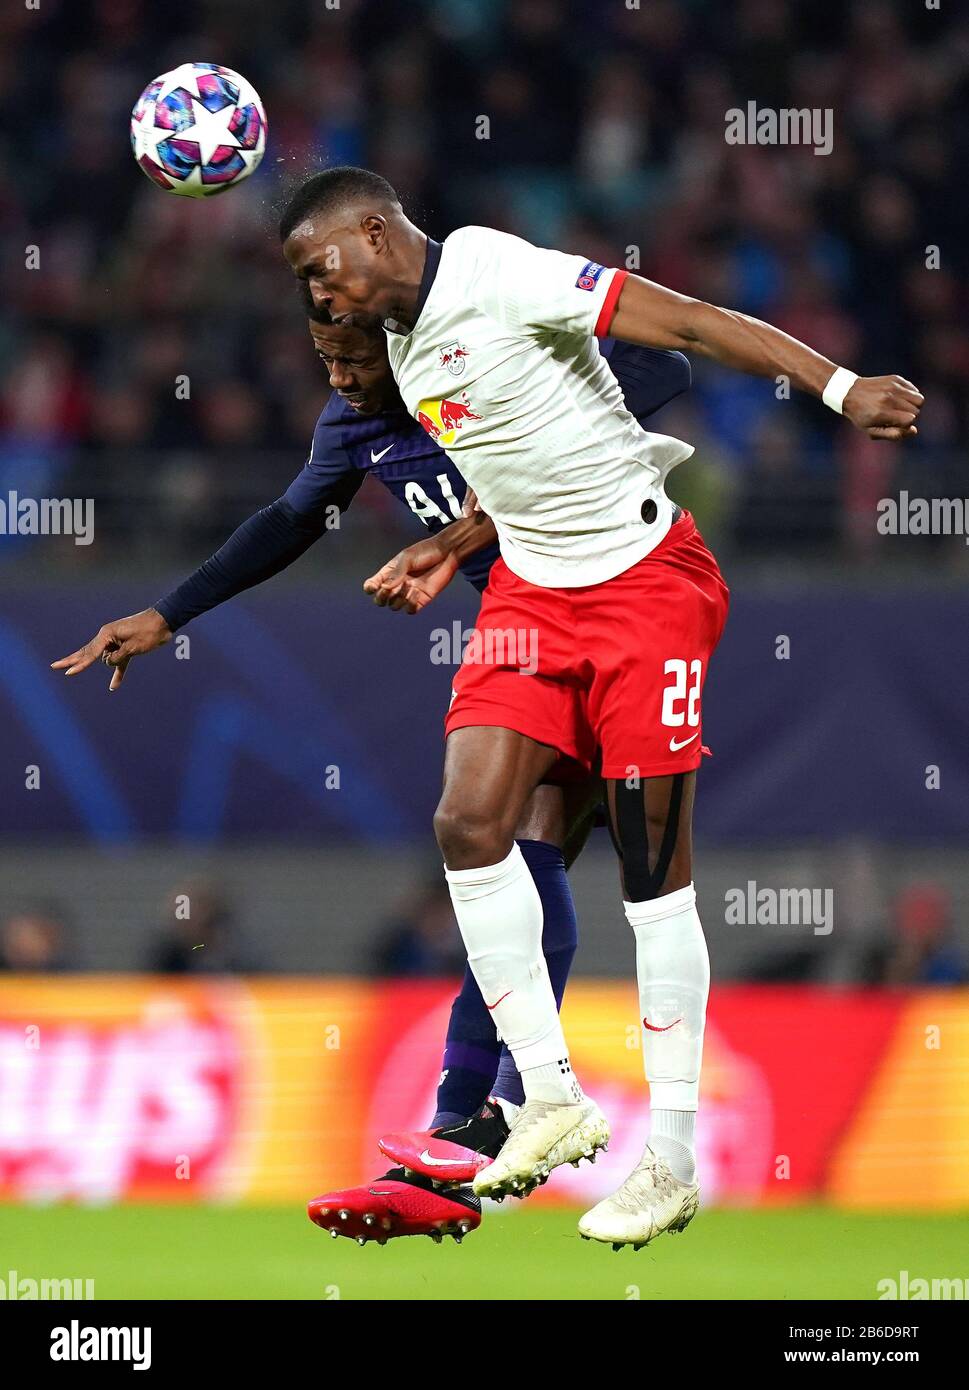 Tottenham Hotspur's Ryan Sessegnon (left) and RB Leipzig's Nordi Mukiele battle for the ball during the UEFA Champions League round of 16 second leg match at the Red Bull Arena, Leipzig. Stock Photo